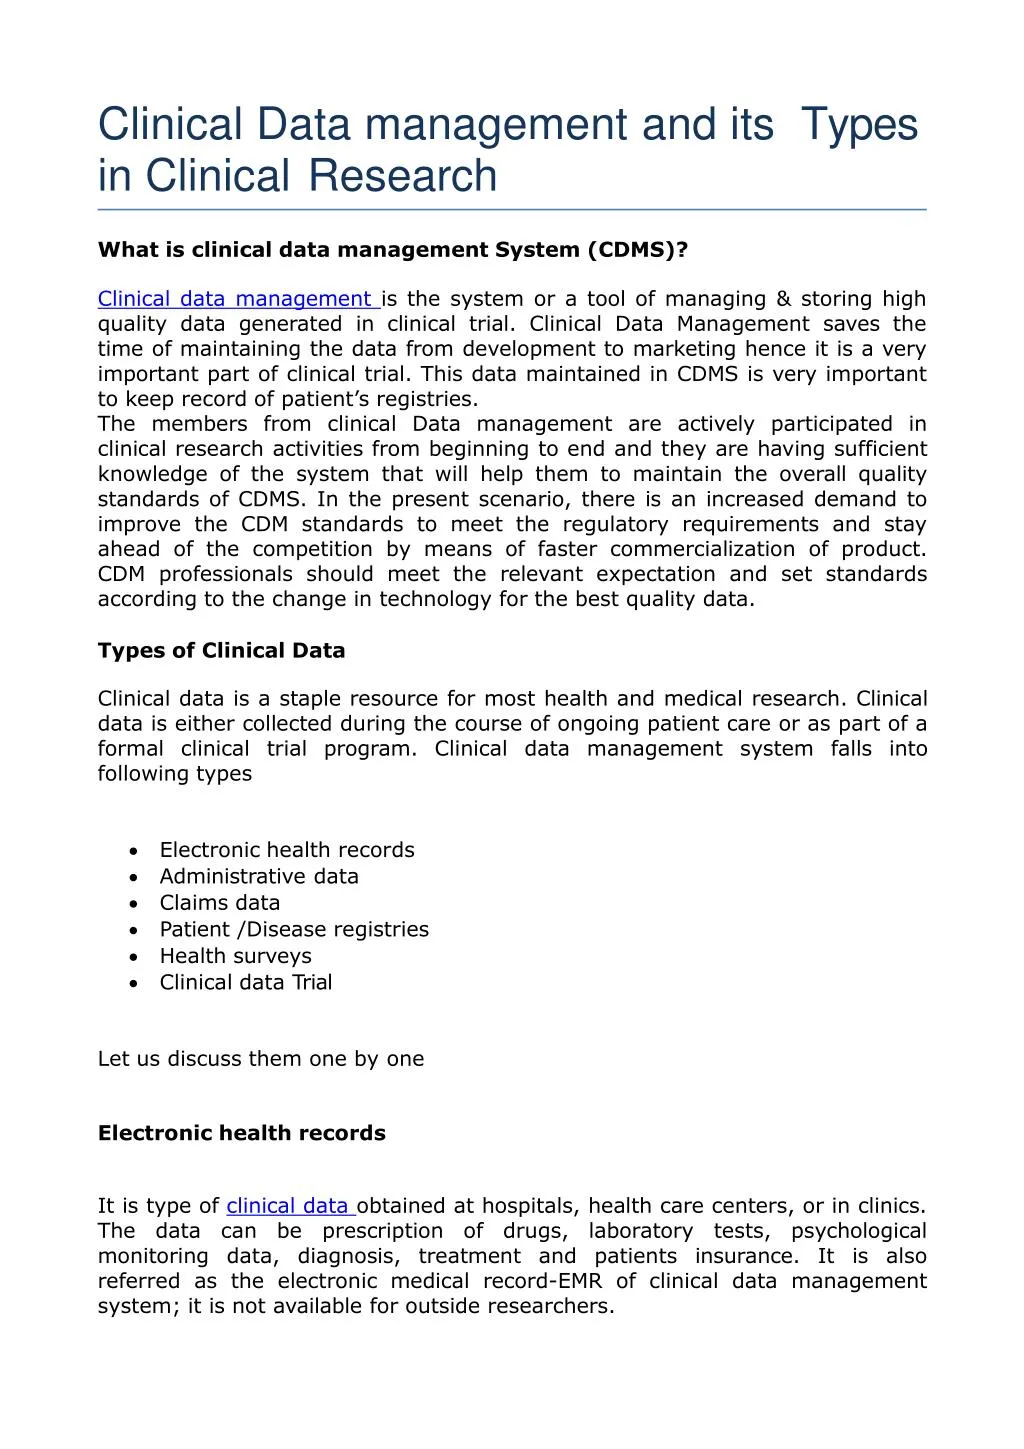 clinical data management and its types in clinical research